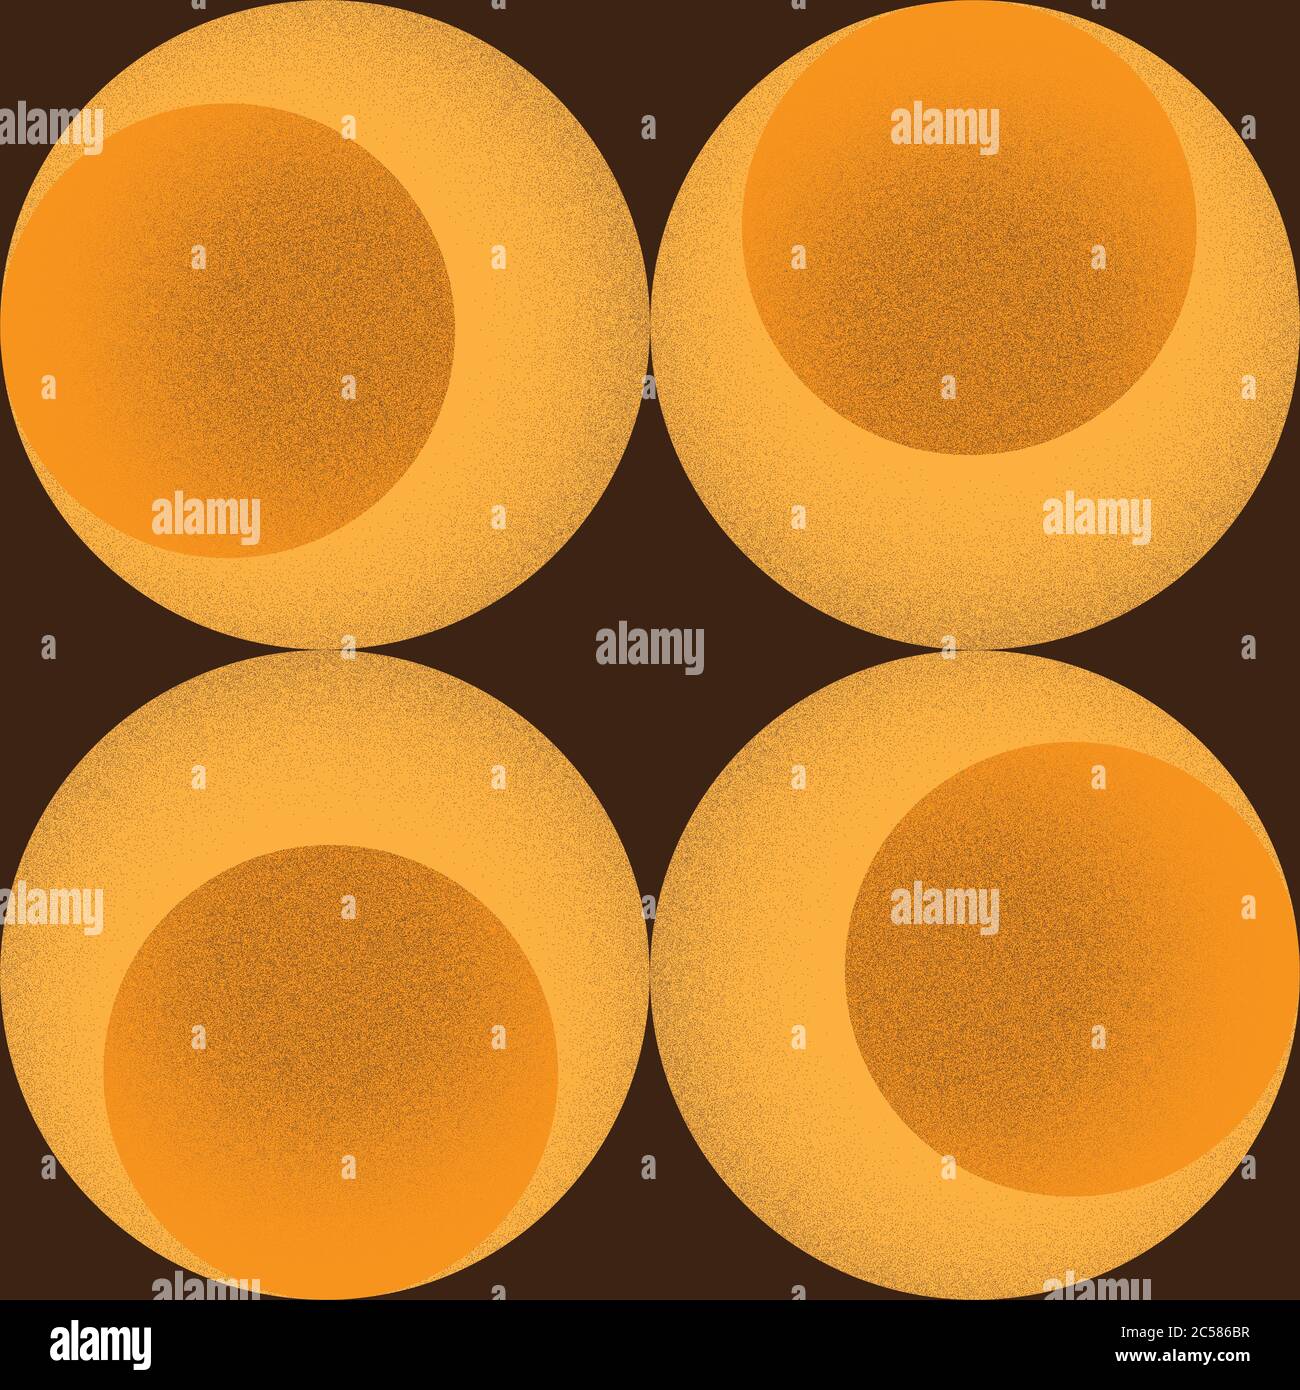 Retro coloured scheme seamless 1960s or 70s style geometric pattern of orange and yellow circles with stippled shading, on a rich brown background. EP Stock Vector